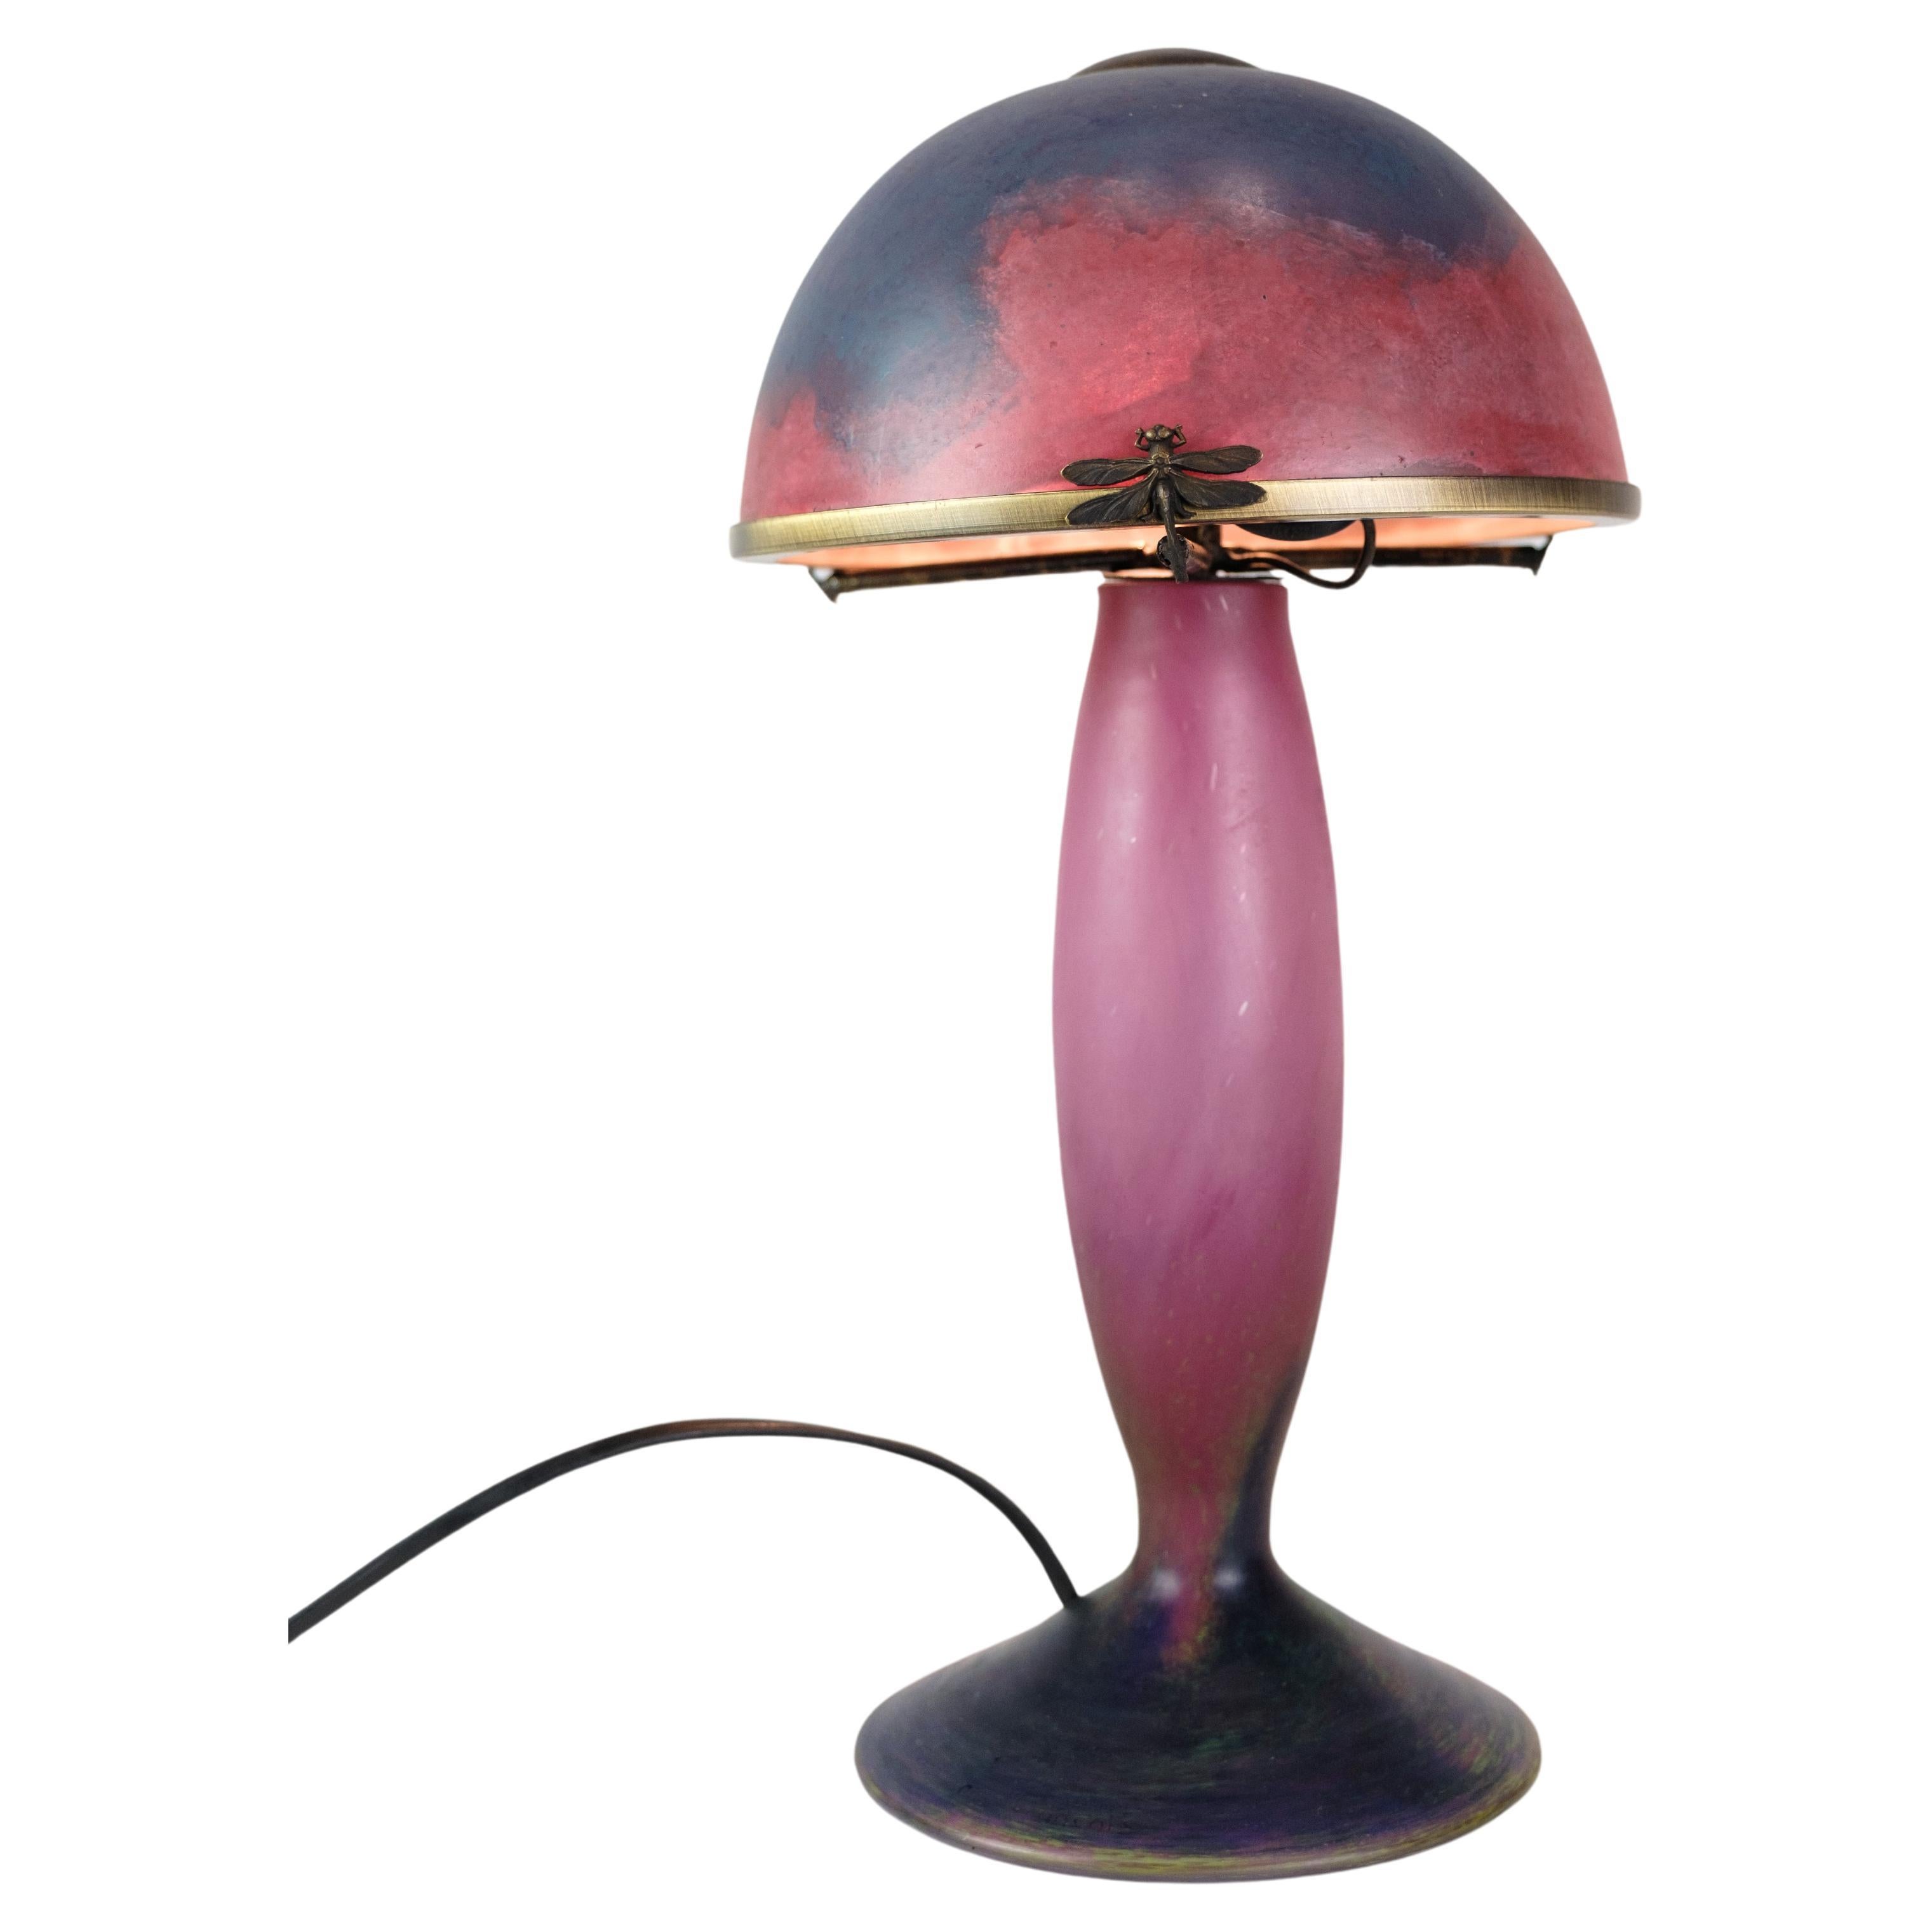 French Table Lamp in Dark Purple and Bordeaux Colors, Le Verre Francais, 1920s For Sale